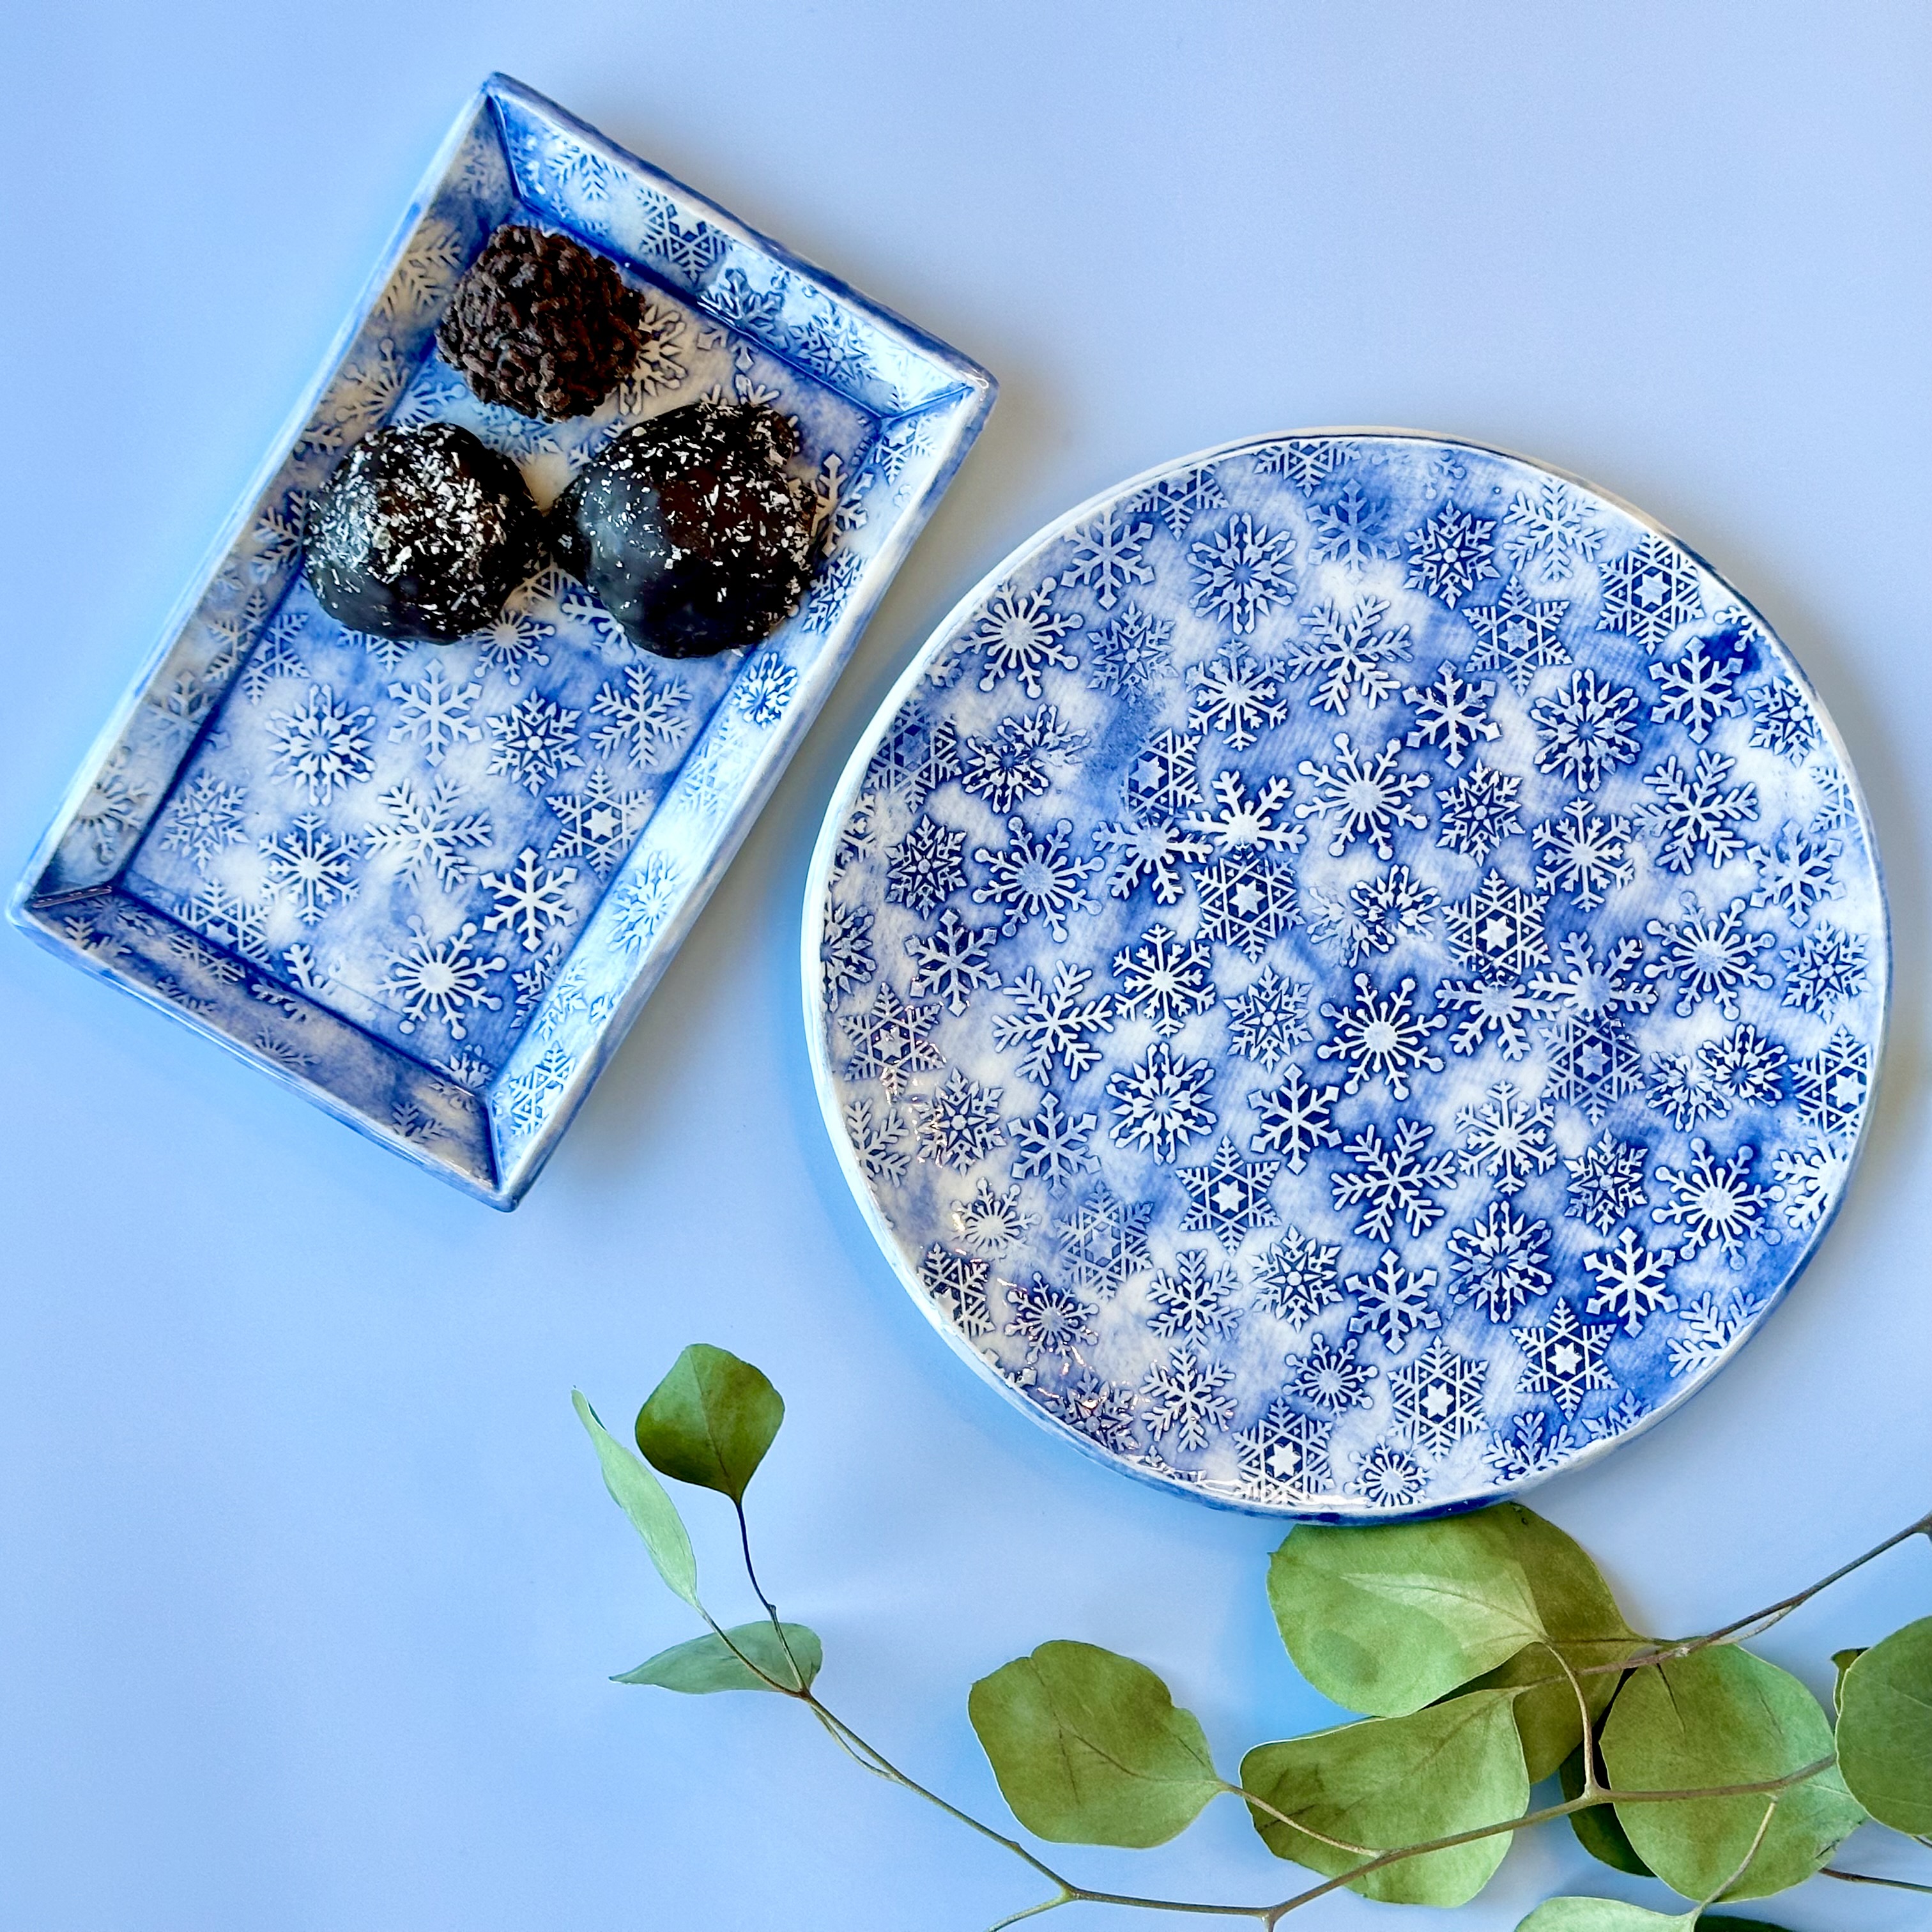 Handbuild a Plate with a Snowflake Texture